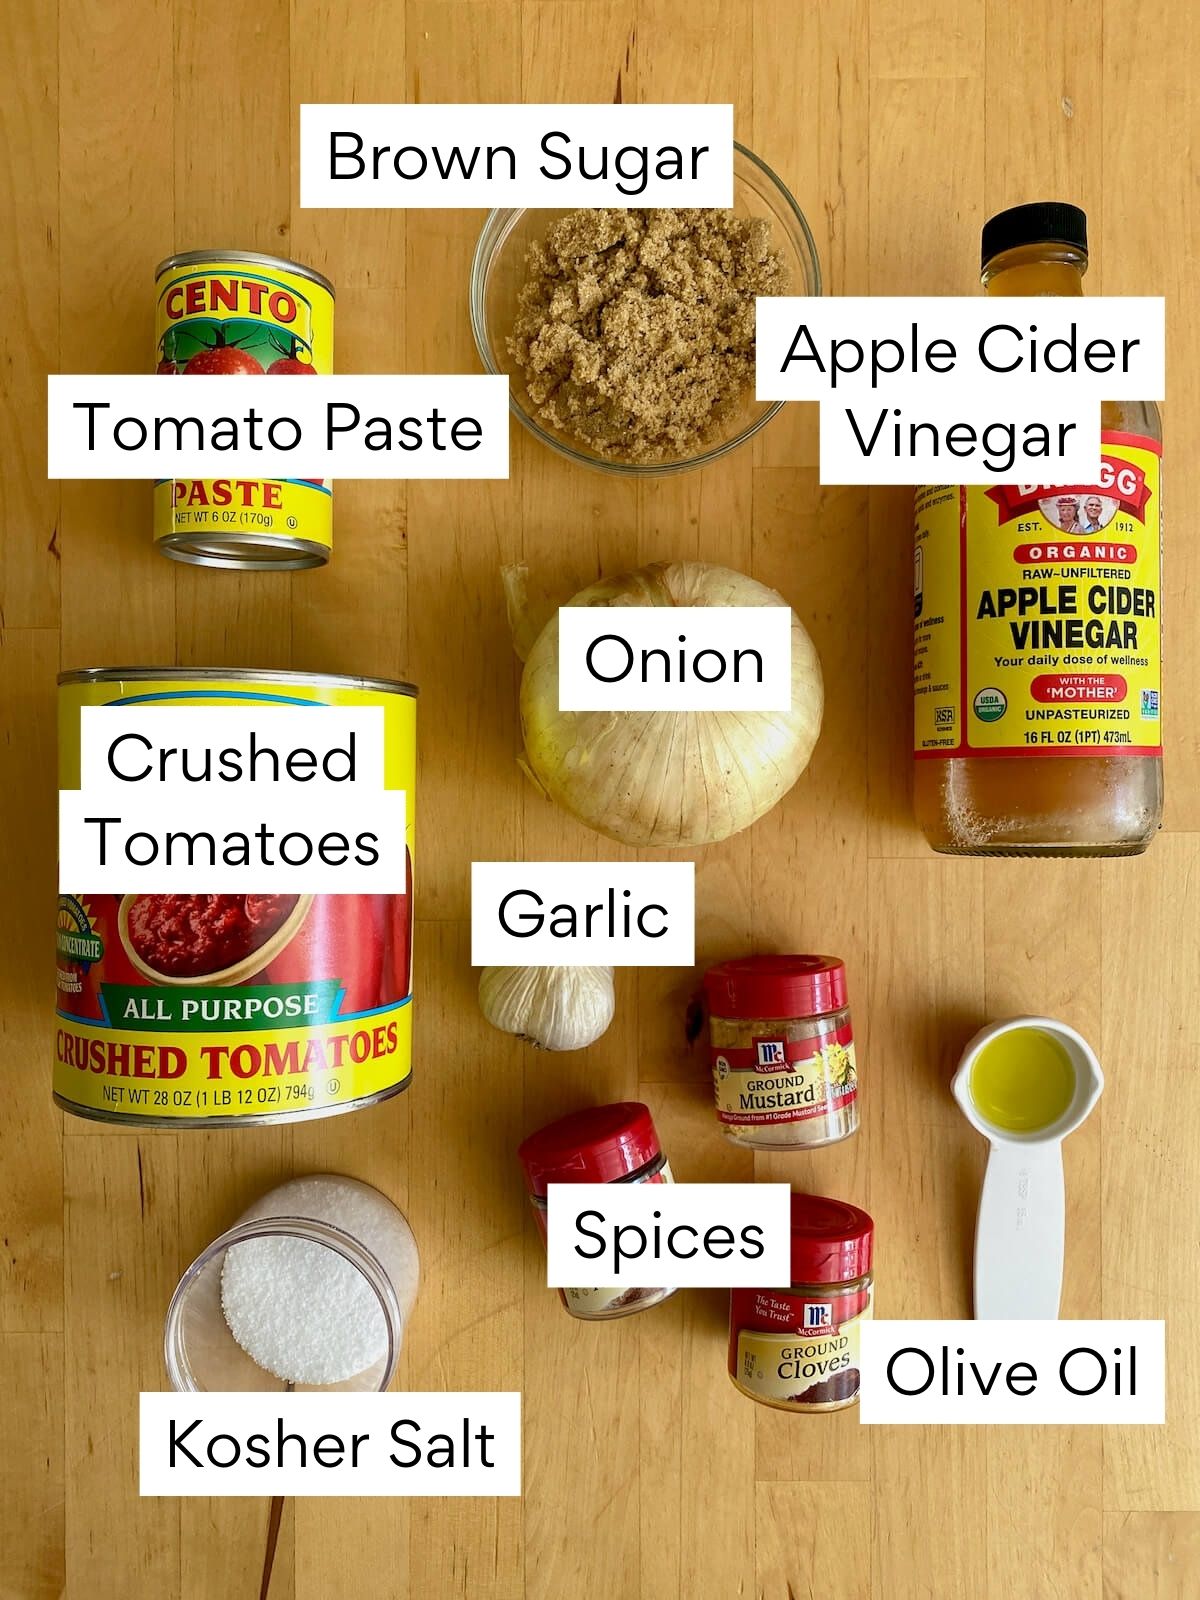 The ingredients to make homemade ketchup. Each ingredient is labeled with text. They include tomato paste, crushed tomatoes, brown sugar, apple cider vinegar, onion, garlic, spices, kosher salt, and olive oil.